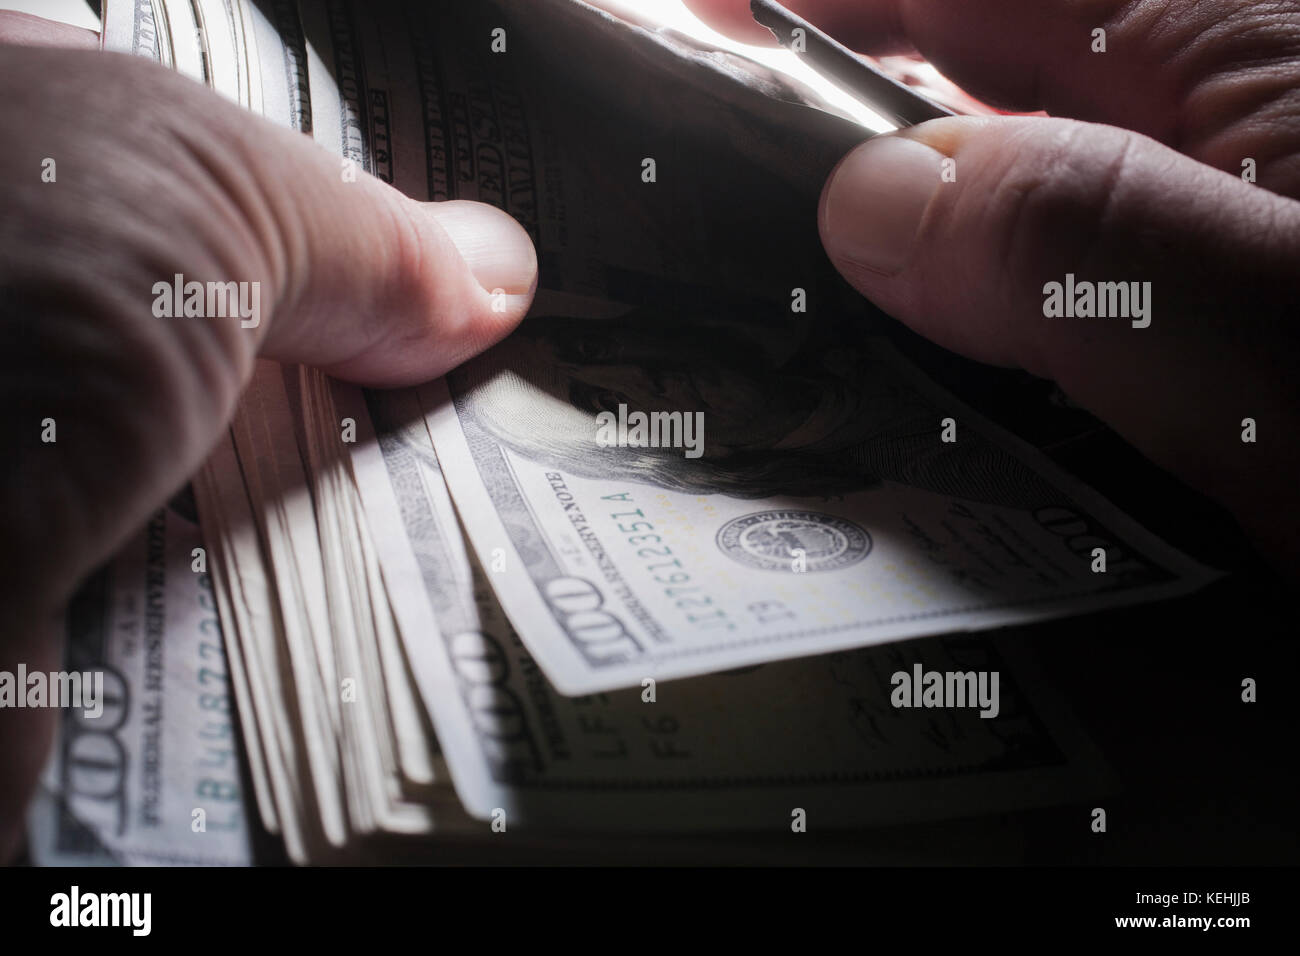 Hands of man counting money Stock Photo